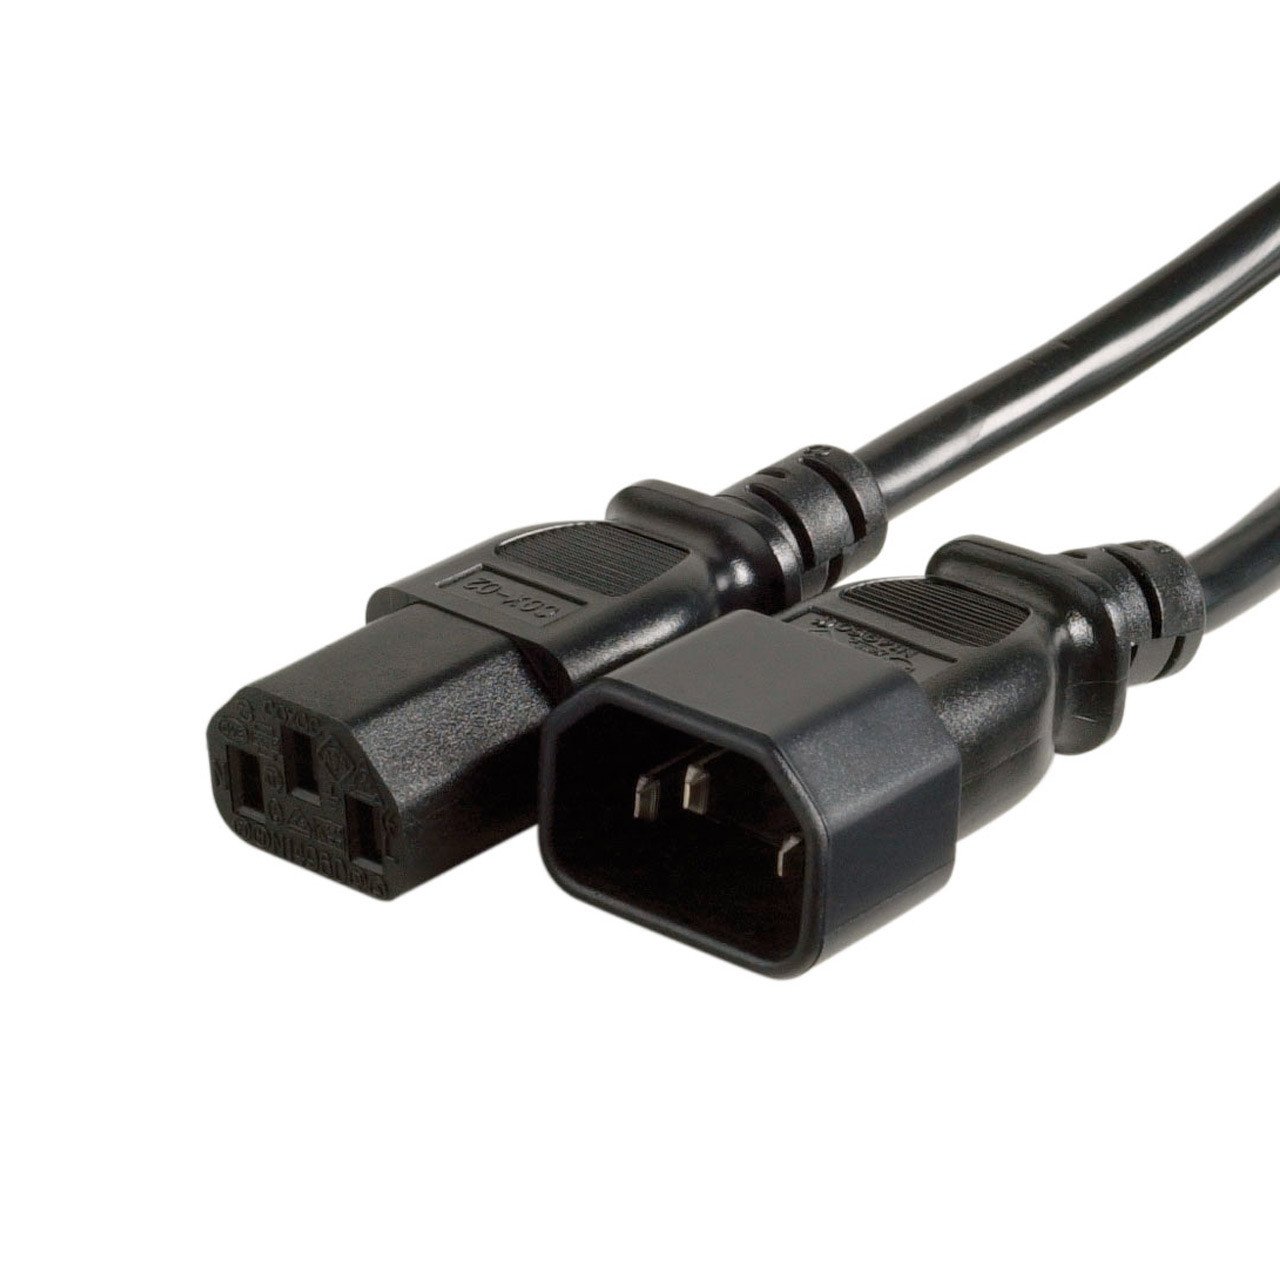 Cables & Adapters - UXL SKP-2: 1.8MTR MALE TO FEMALE IEC AC POWER LEAD